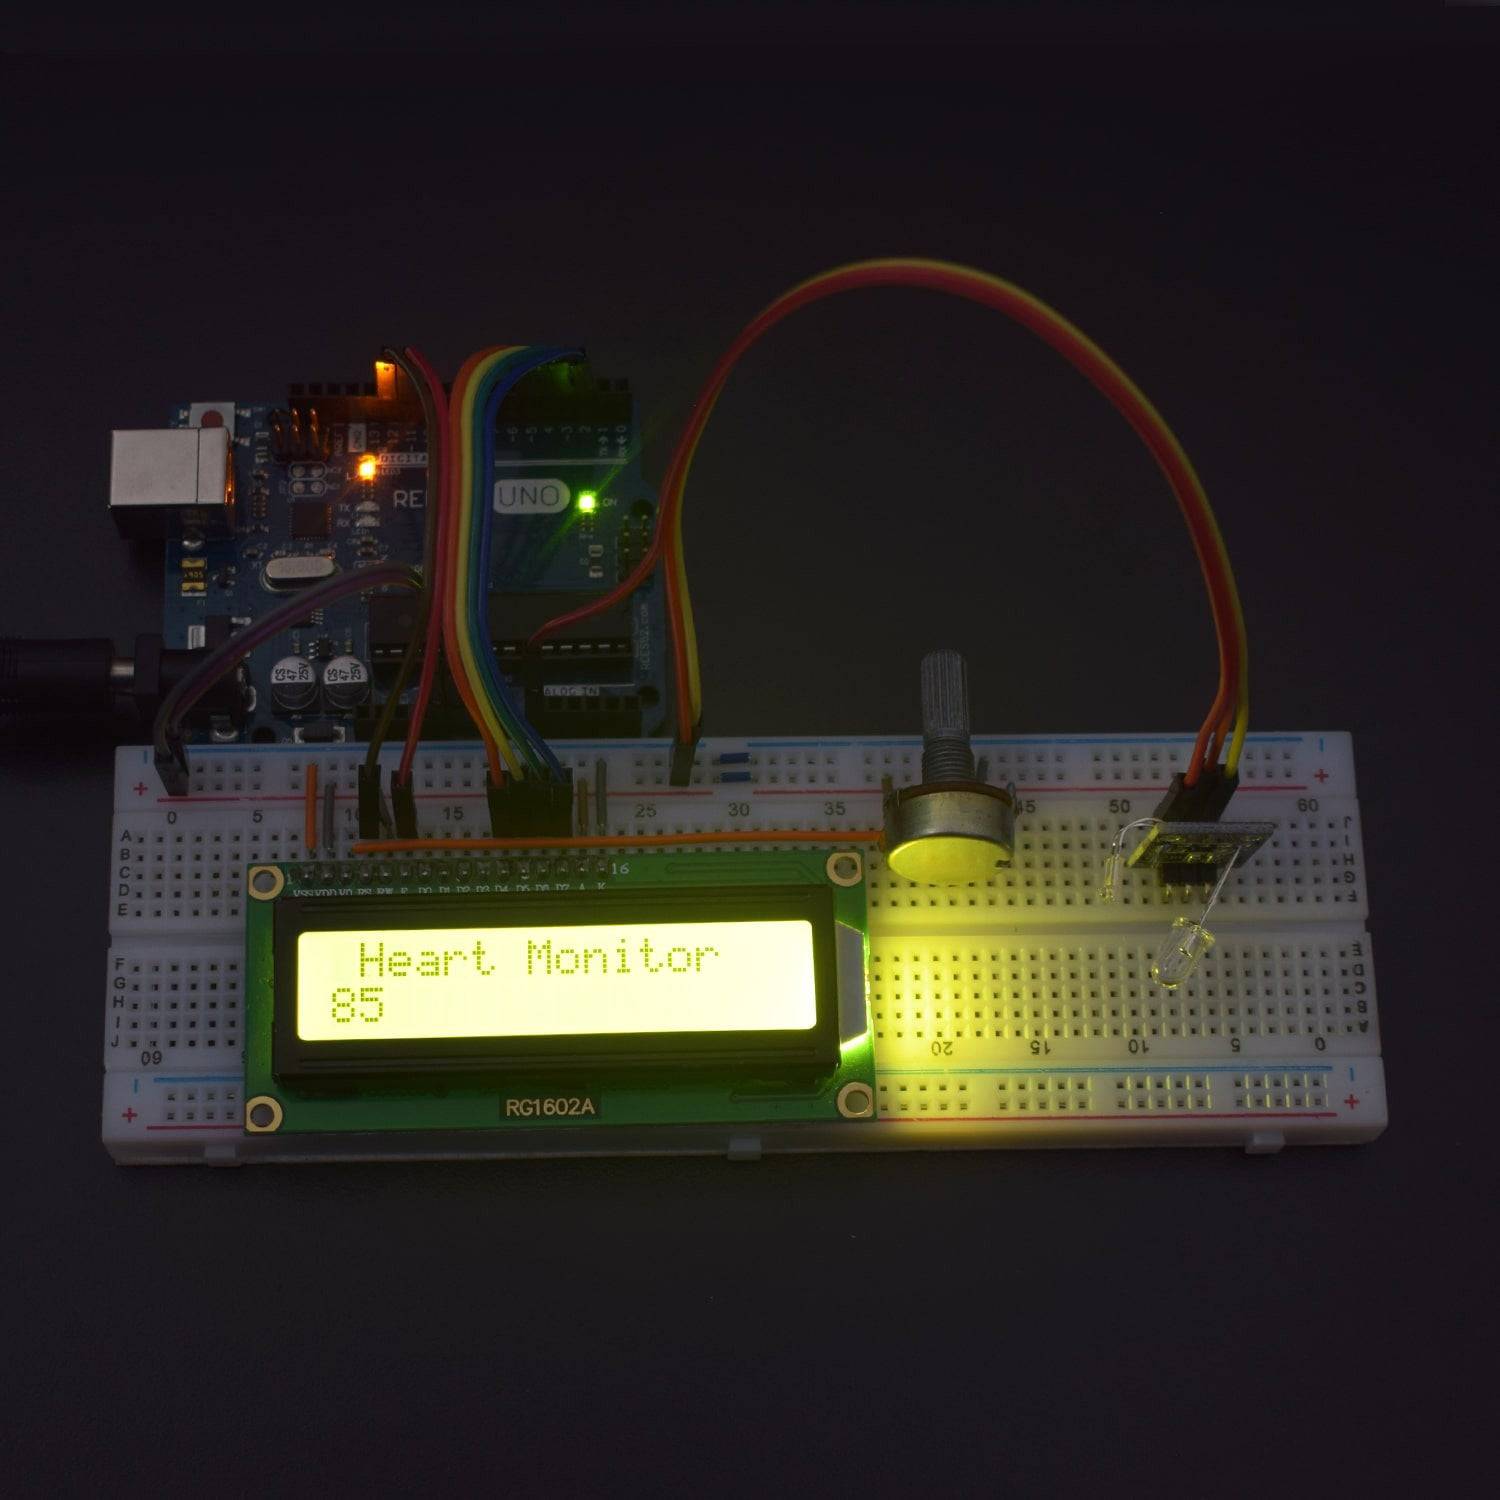 Measure heart beat with heart beat module and display the data on 16*2 Lcd Display interfacing with Arduino uno - KT942 - REES52